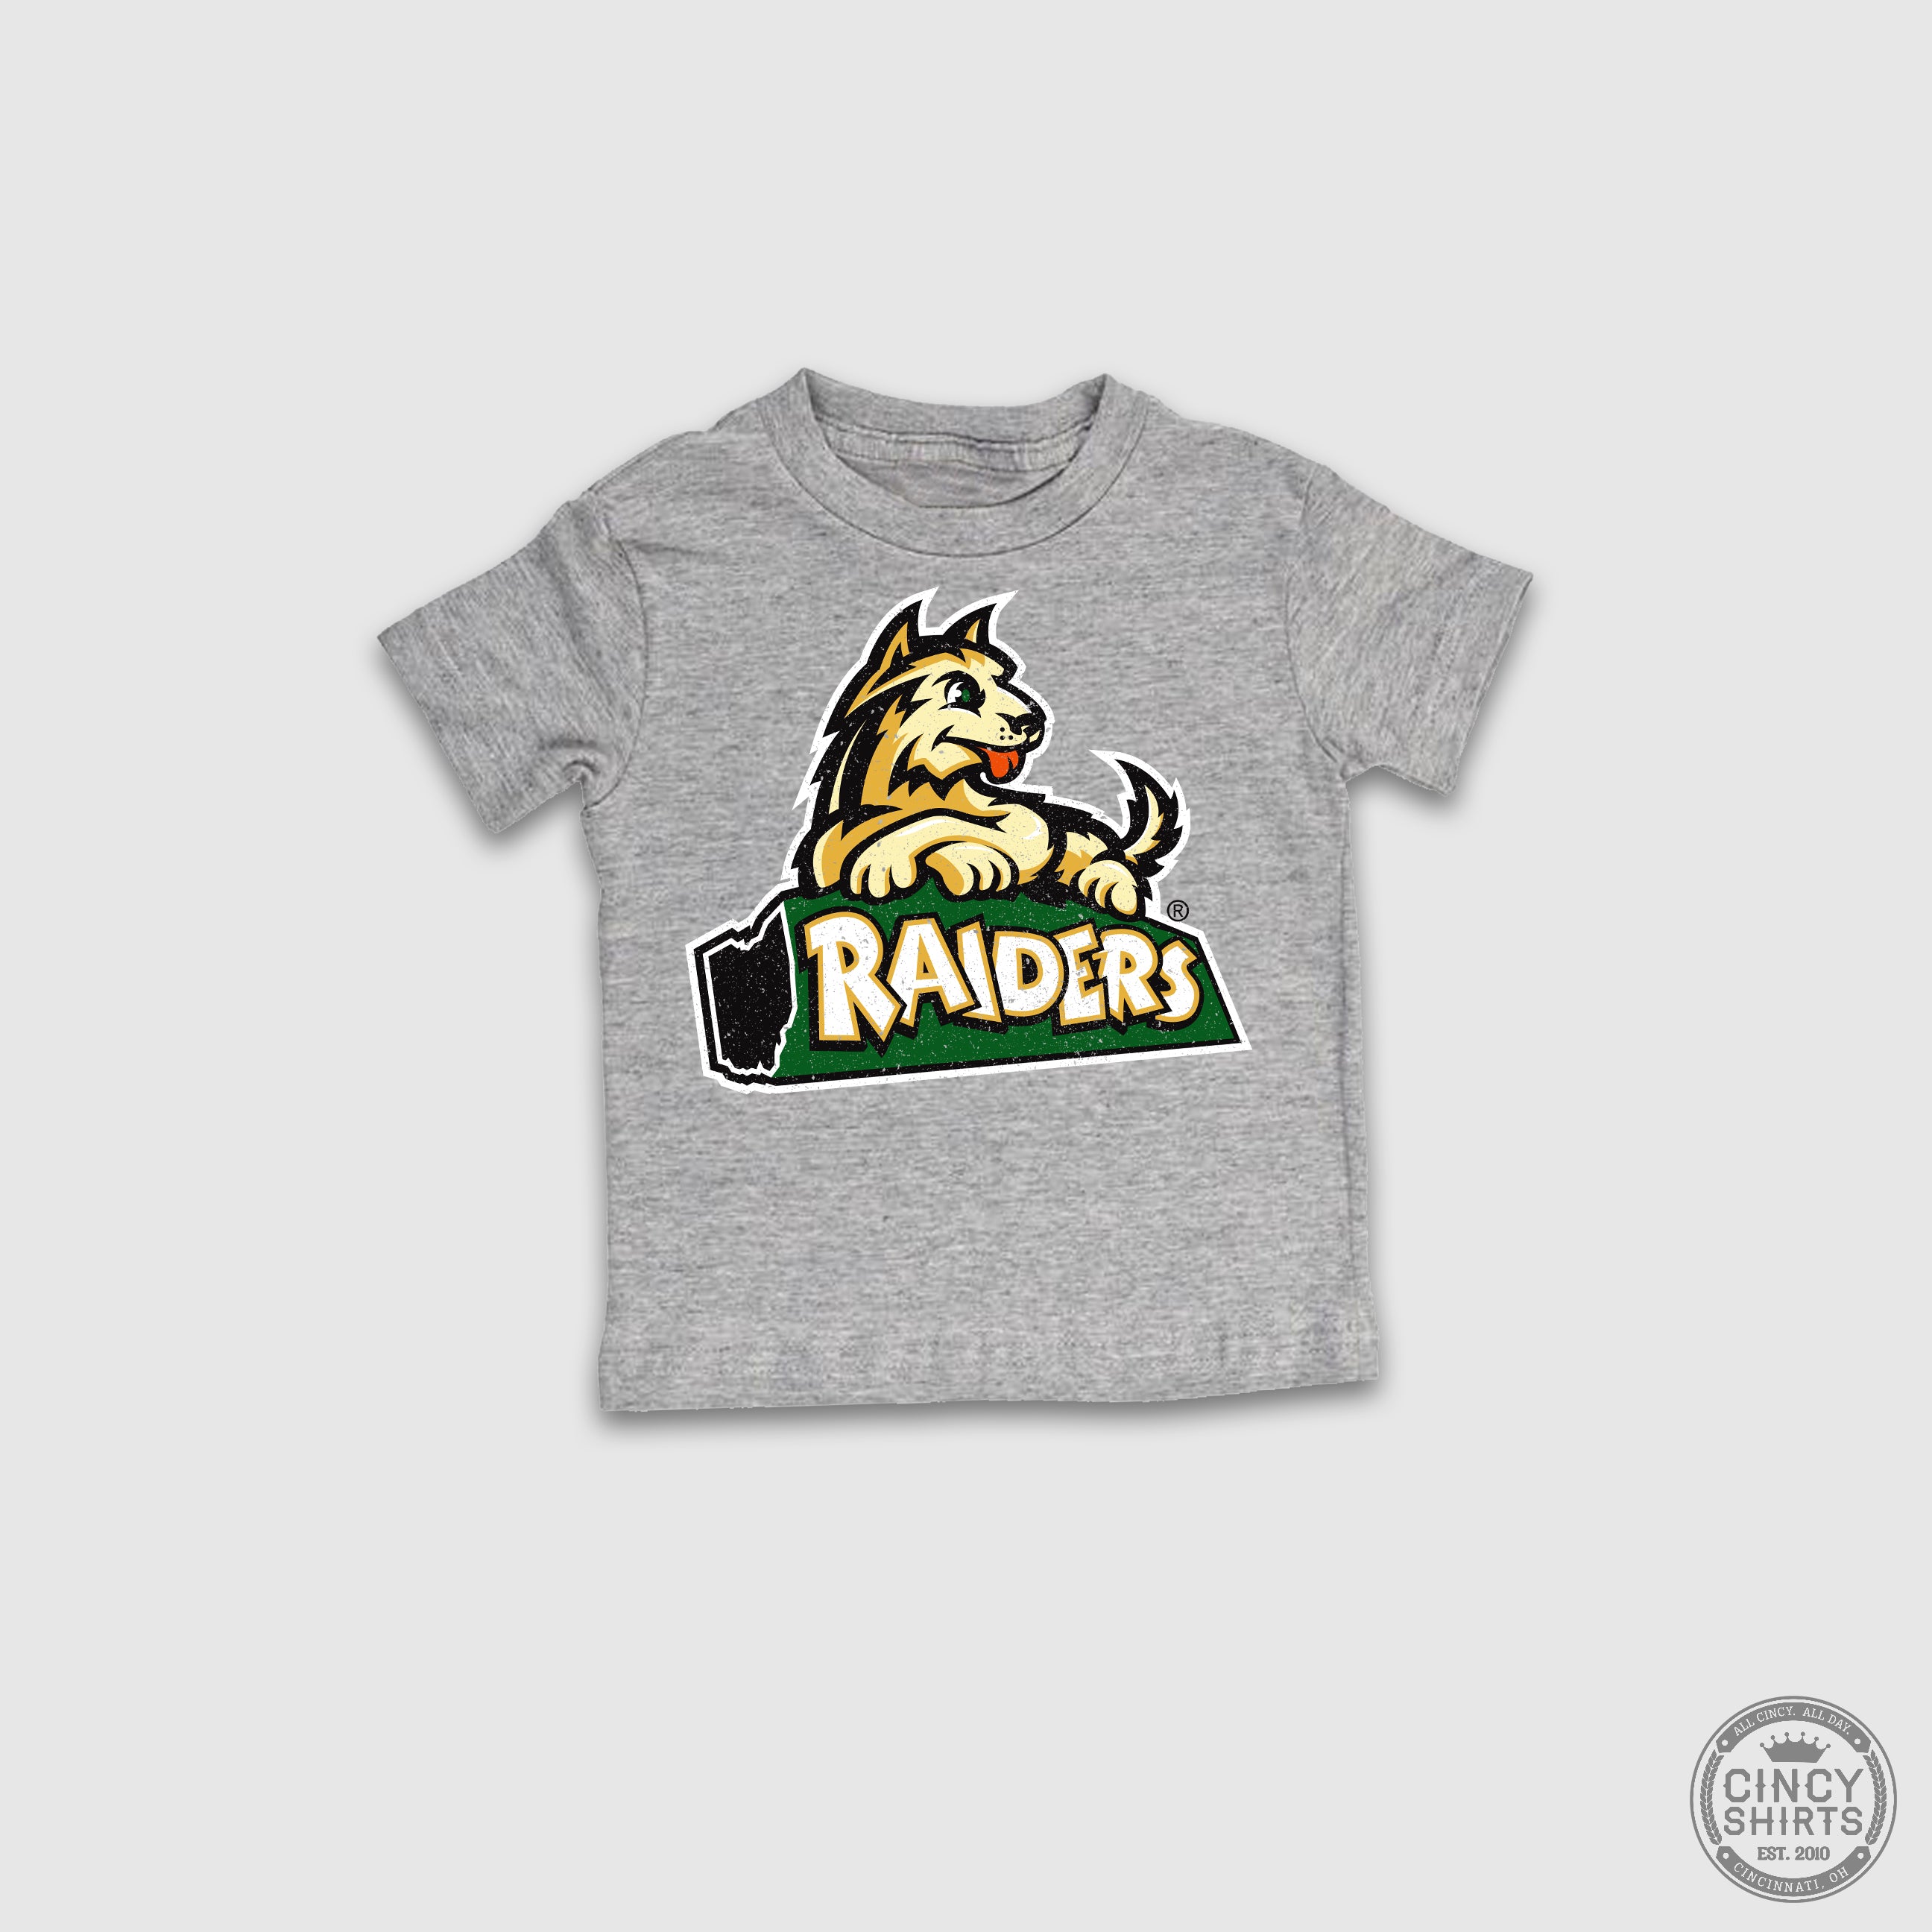 Wright State Raiders | Kids Official Collegiate Apparel | Cincy Shirts Toddler T-Shirt / Heather Grey / 4T